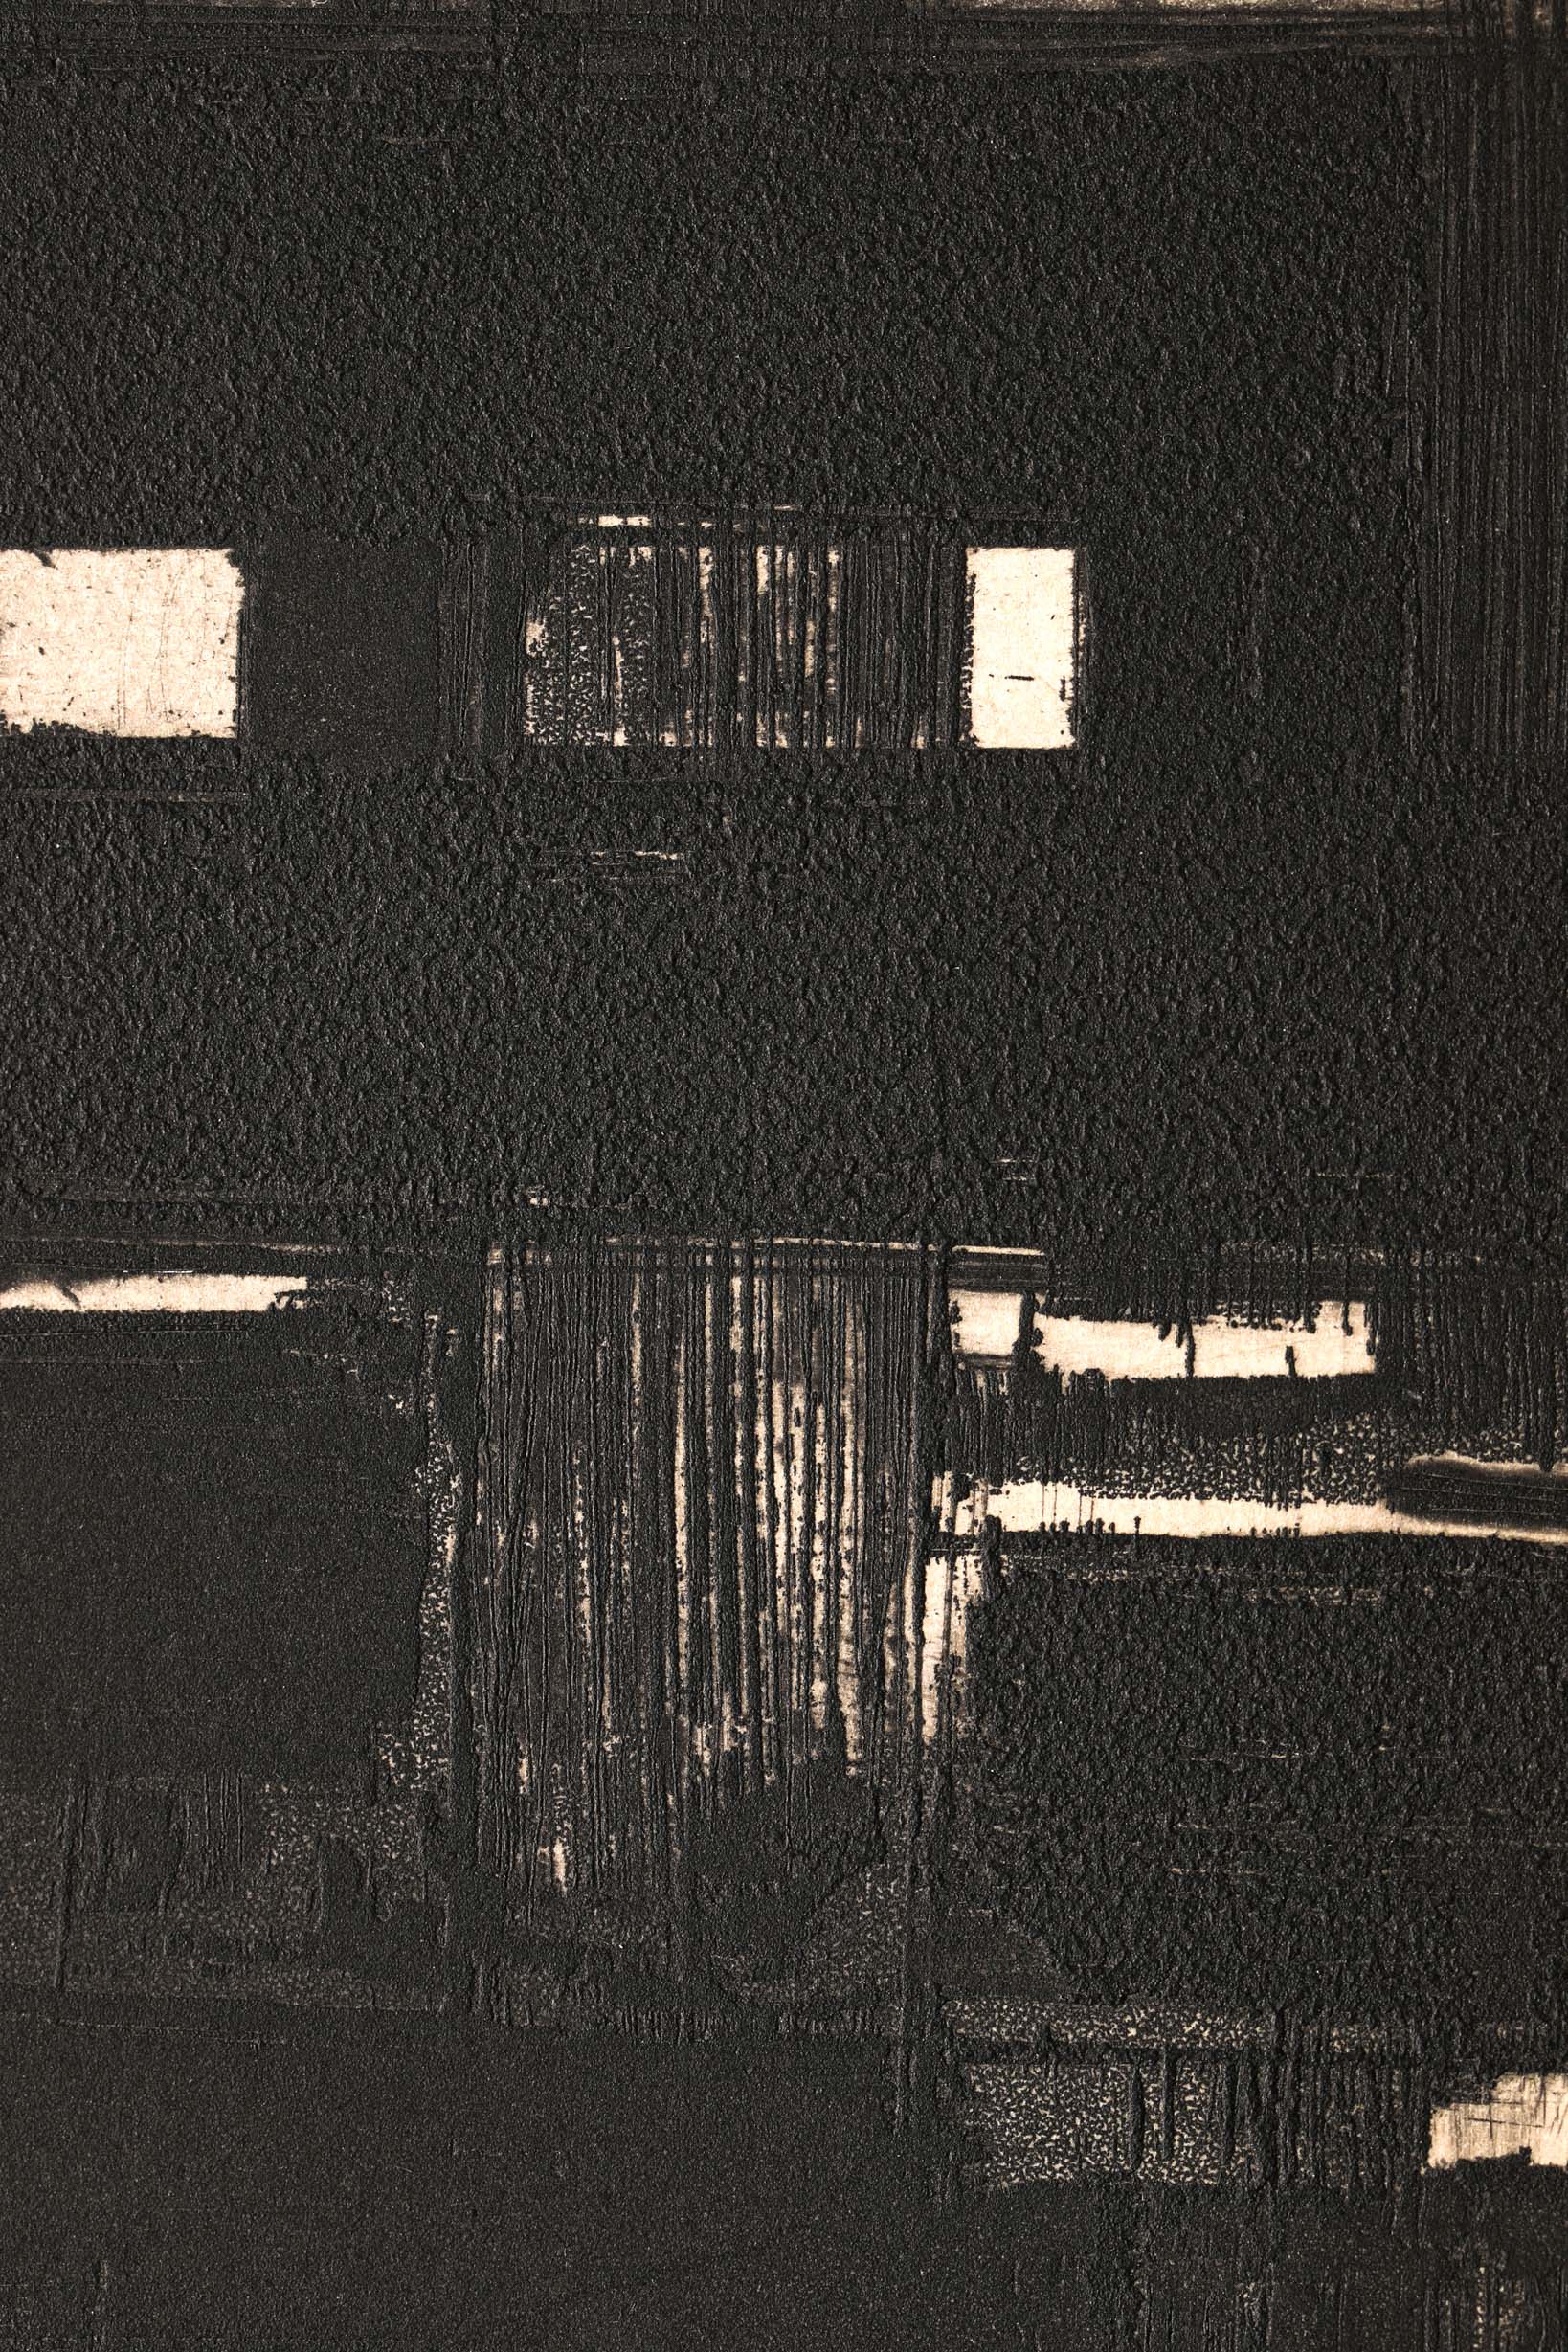 Pierre Soulages*, Eau forte III, 1956, Etching - Image 4 of 4